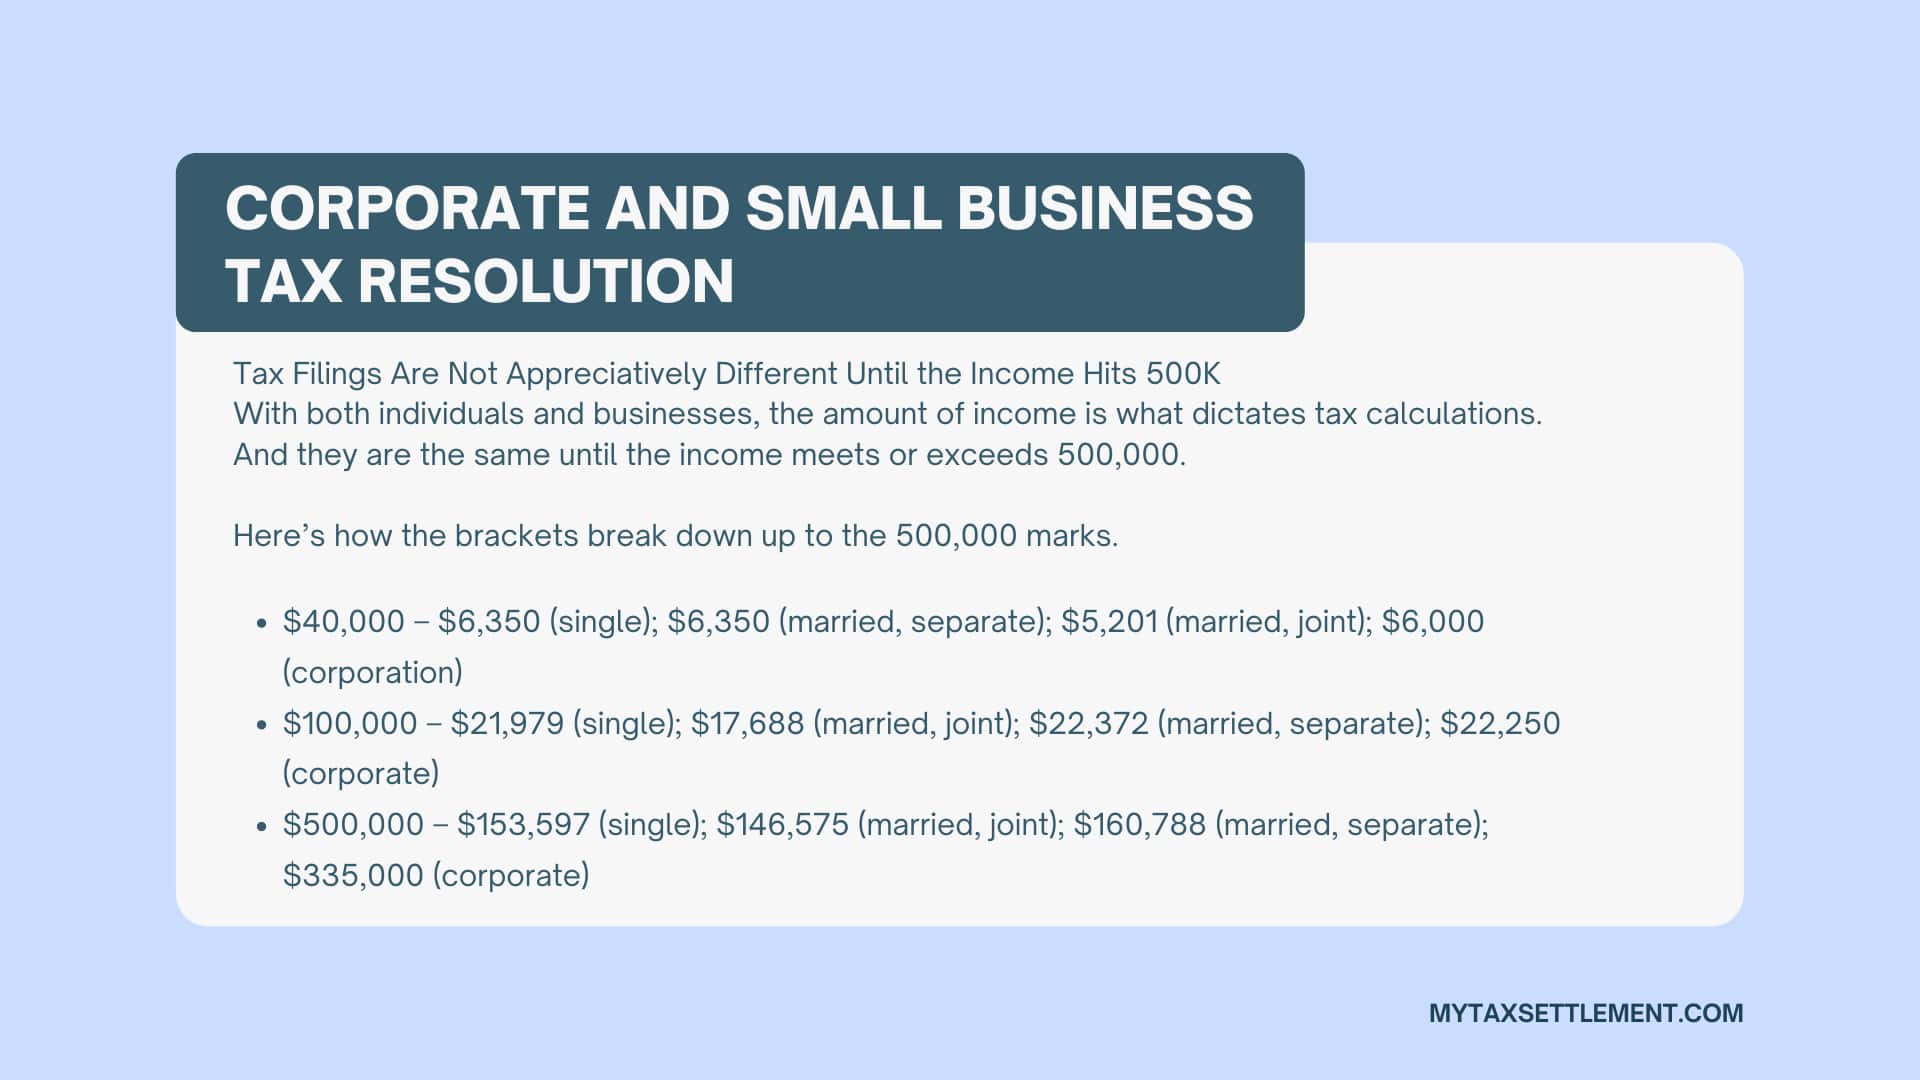 Corporate and Small Business Tax Resolution